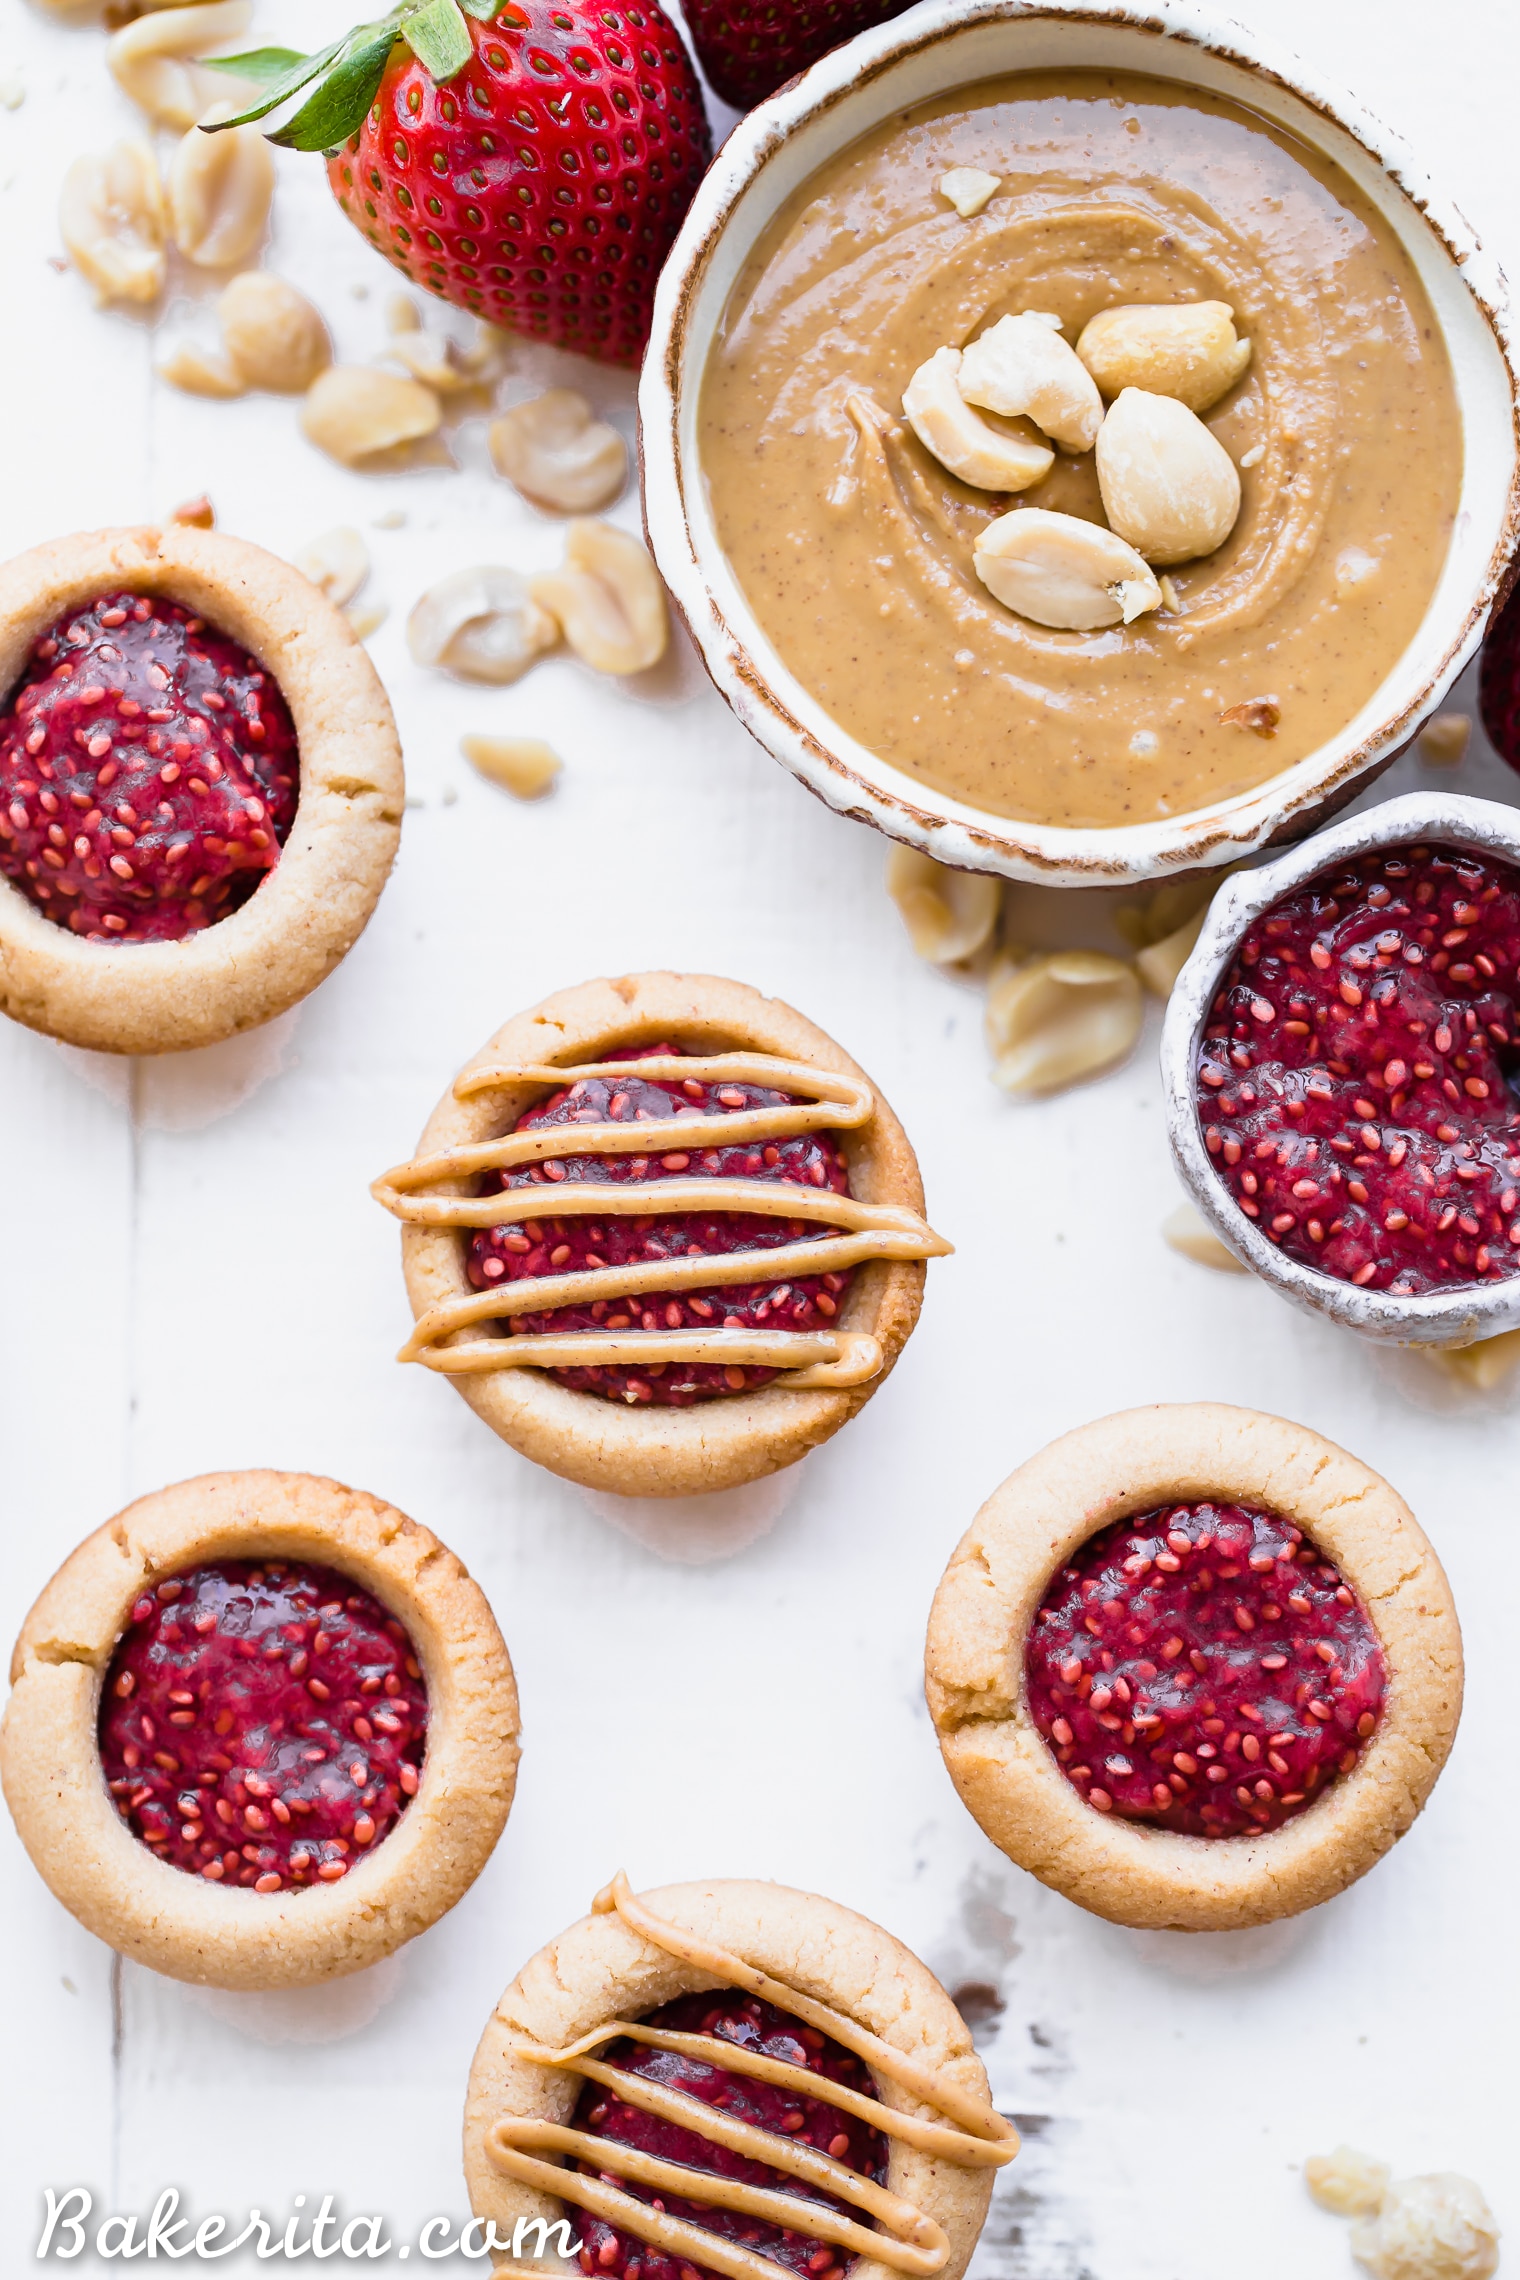 These Peanut Butter & Jelly Tartlets are made with just SEVEN ingredients! They have a crunchy peanut butter cookie crust, filled with an easy strawberry chia jam and topped with even more peanut butter. These gluten-free, grain-free, and vegan tartlets are as cute as they are delicious!